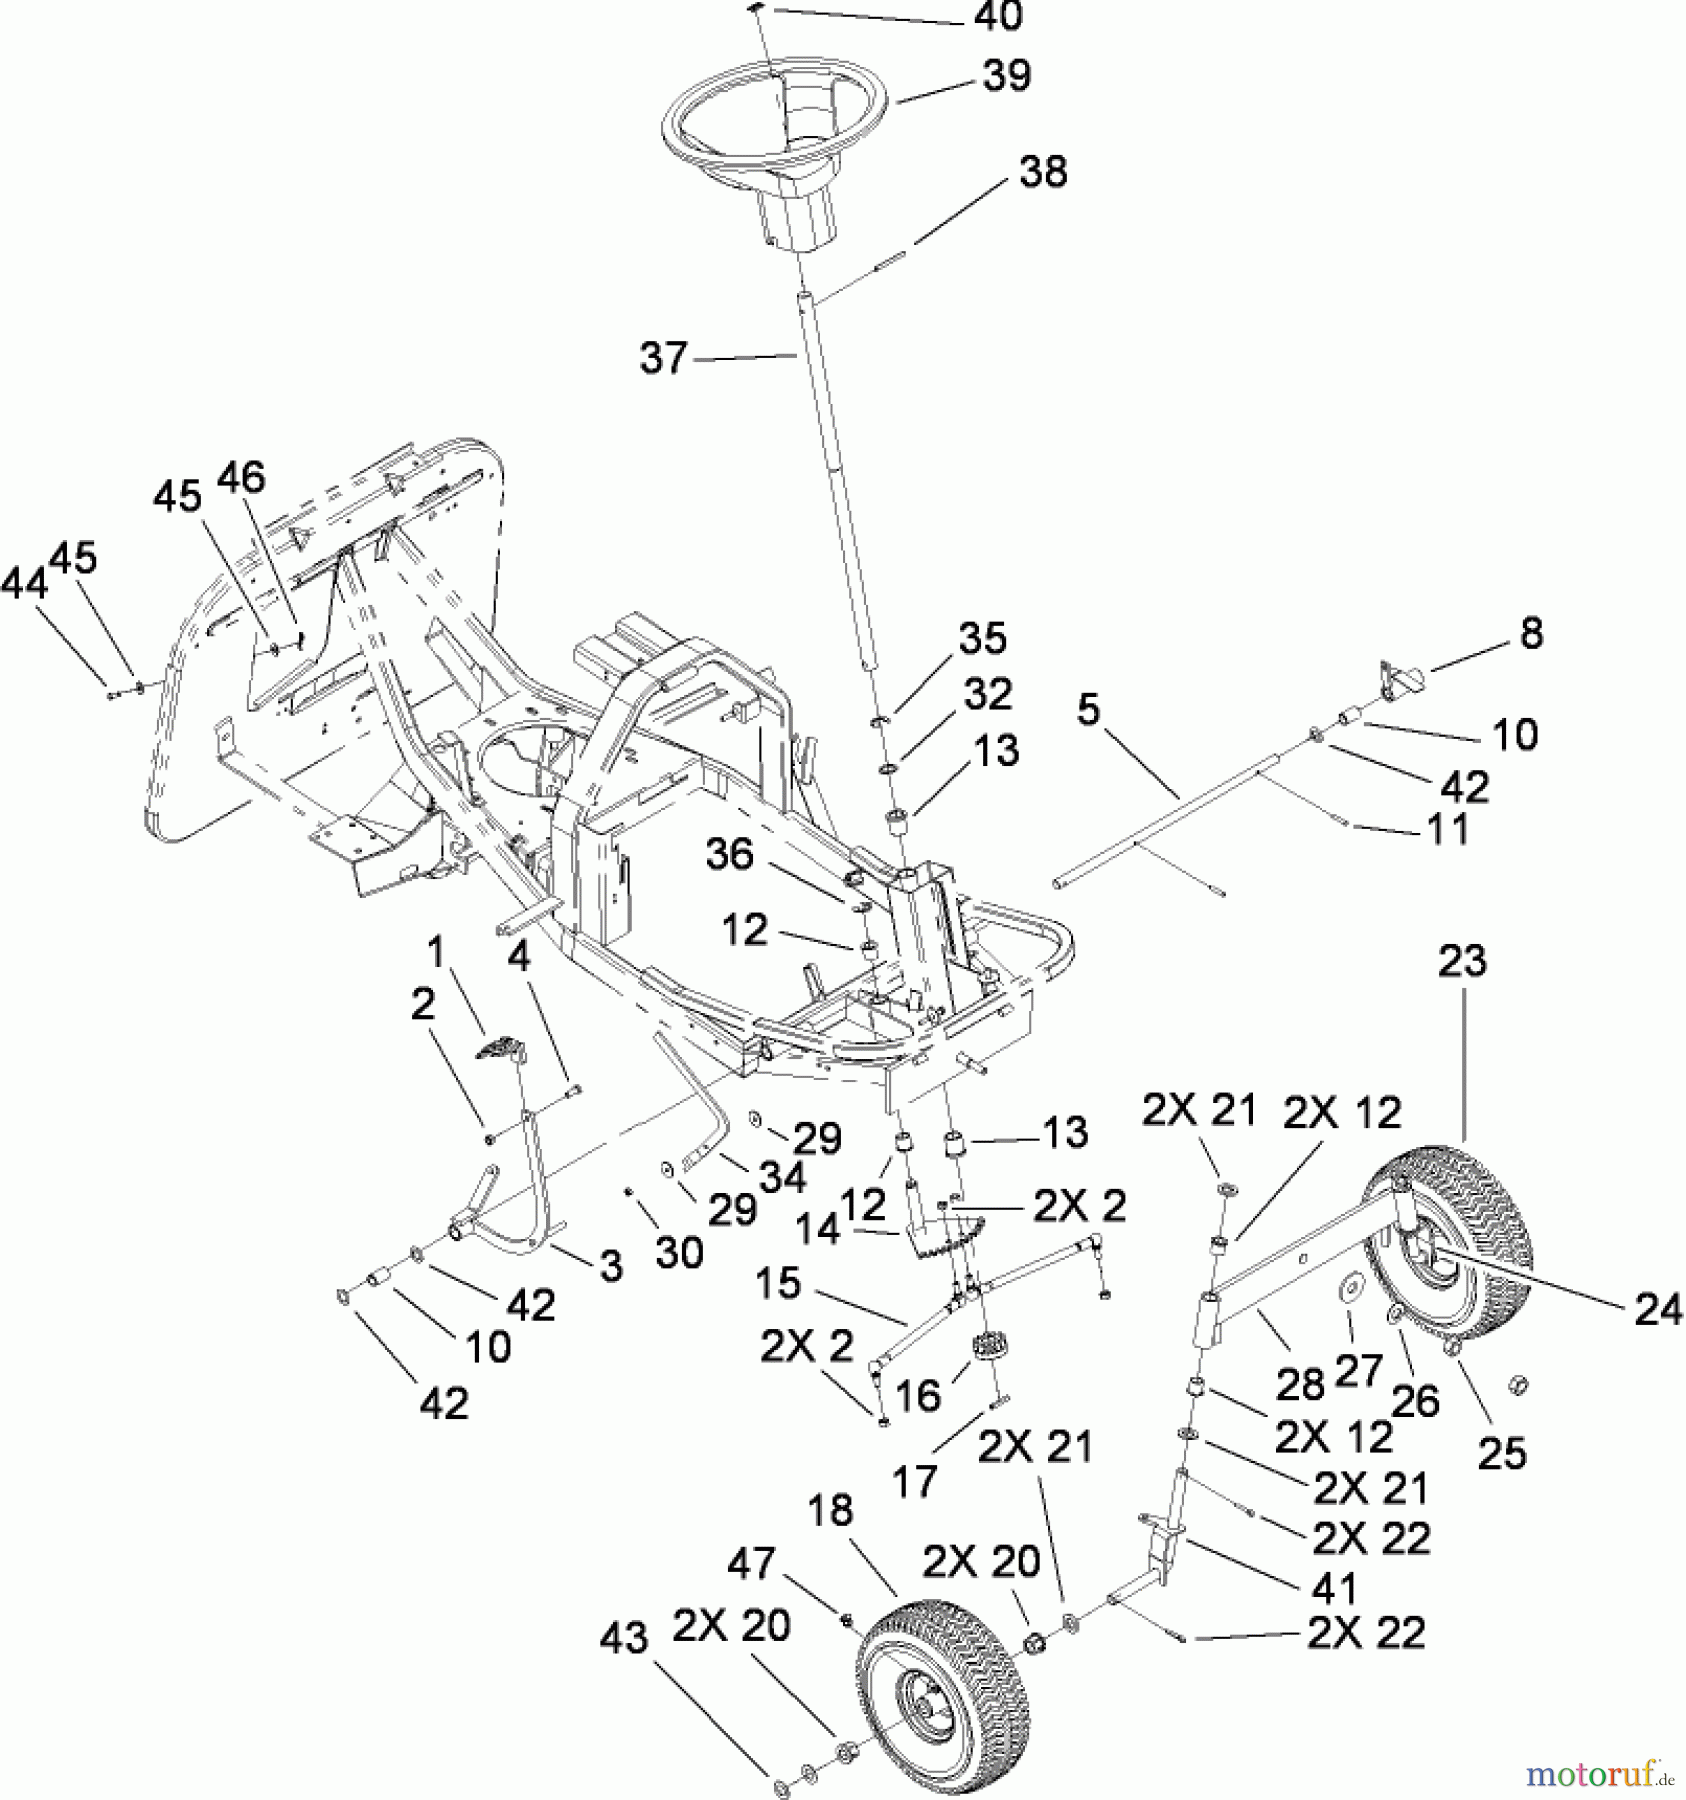  Toro Neu Mowers, Rear-Engine Rider 70185 (G132) - Toro G132 Rear-Engine Riding Mower, 2008 (270805706-280899564) FRONT AXLE AND STEERING ASSEMBLY